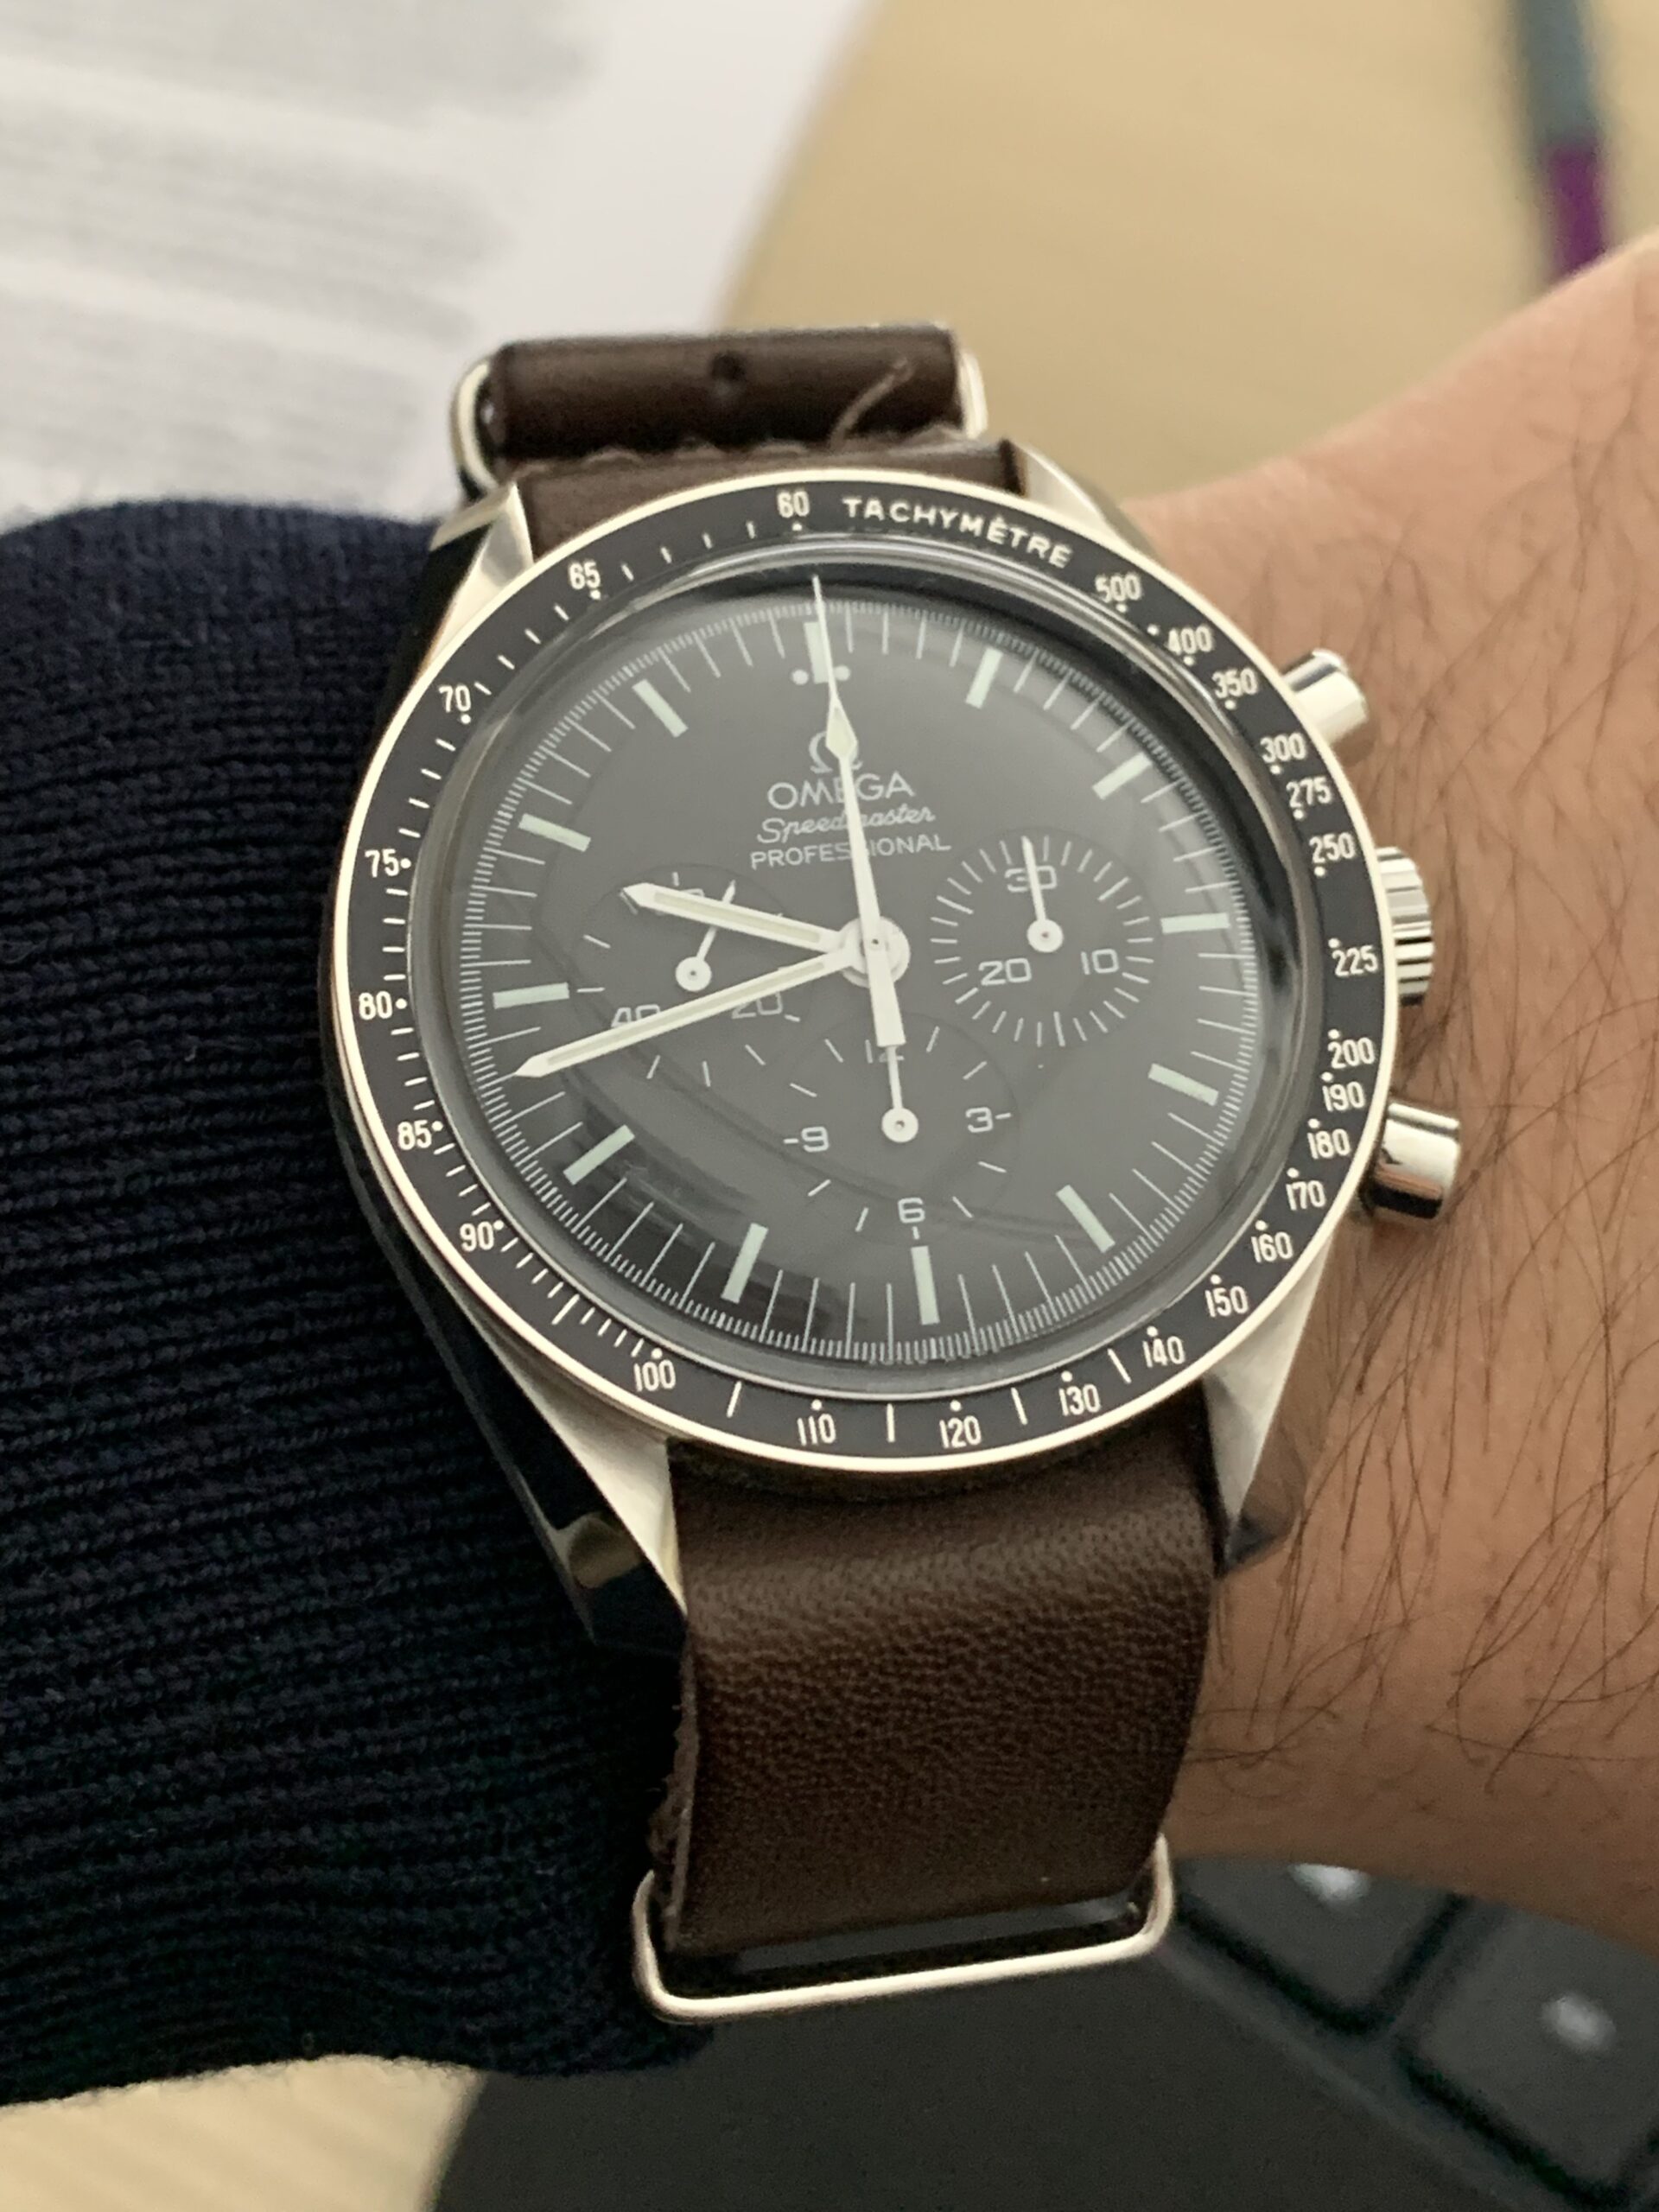 Owner review: I sold my Moonwatch